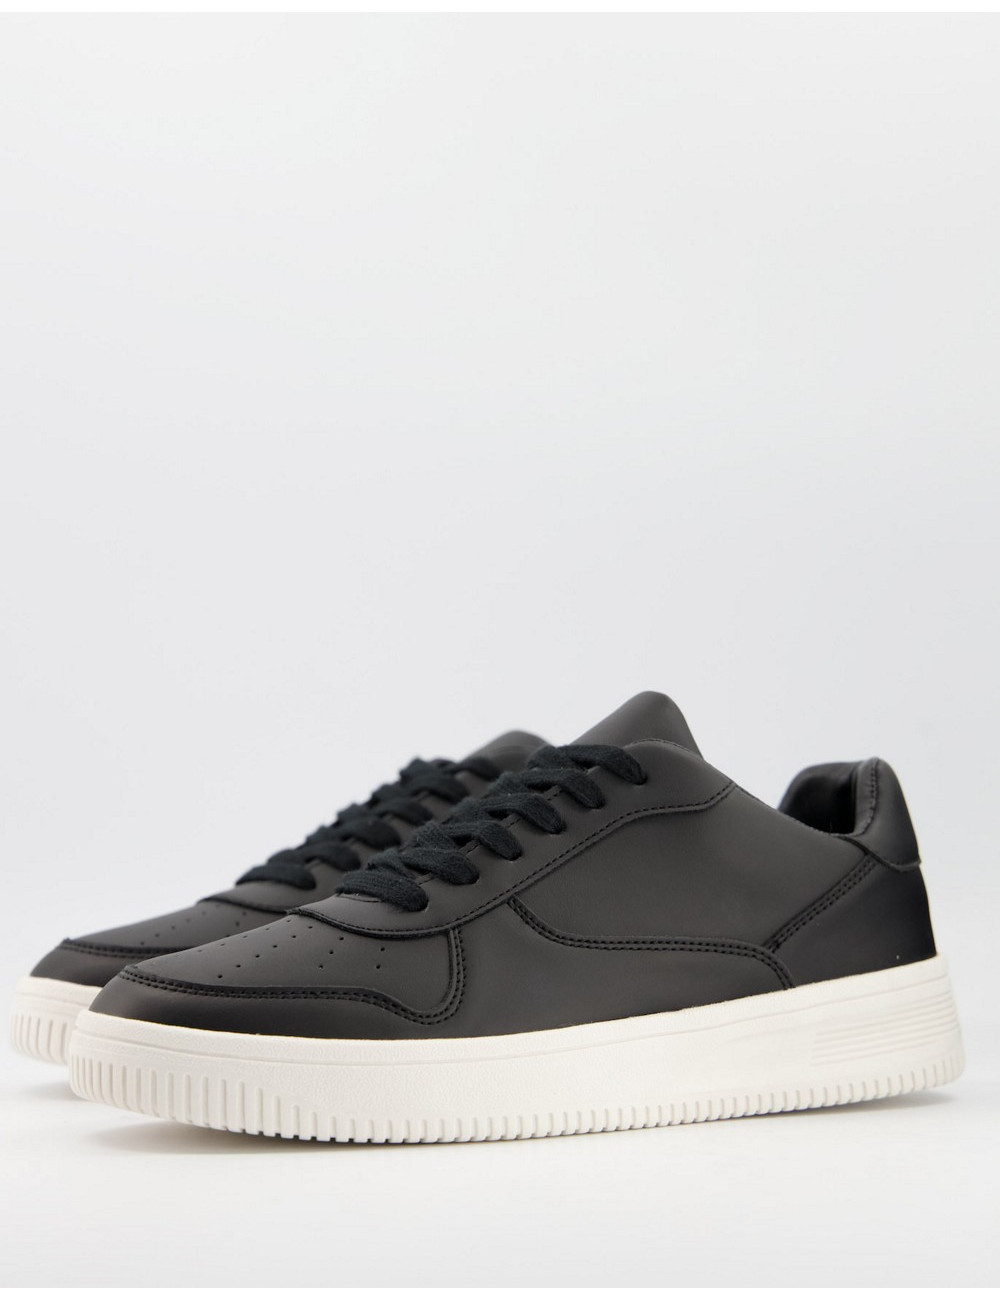 New Look trainer in black